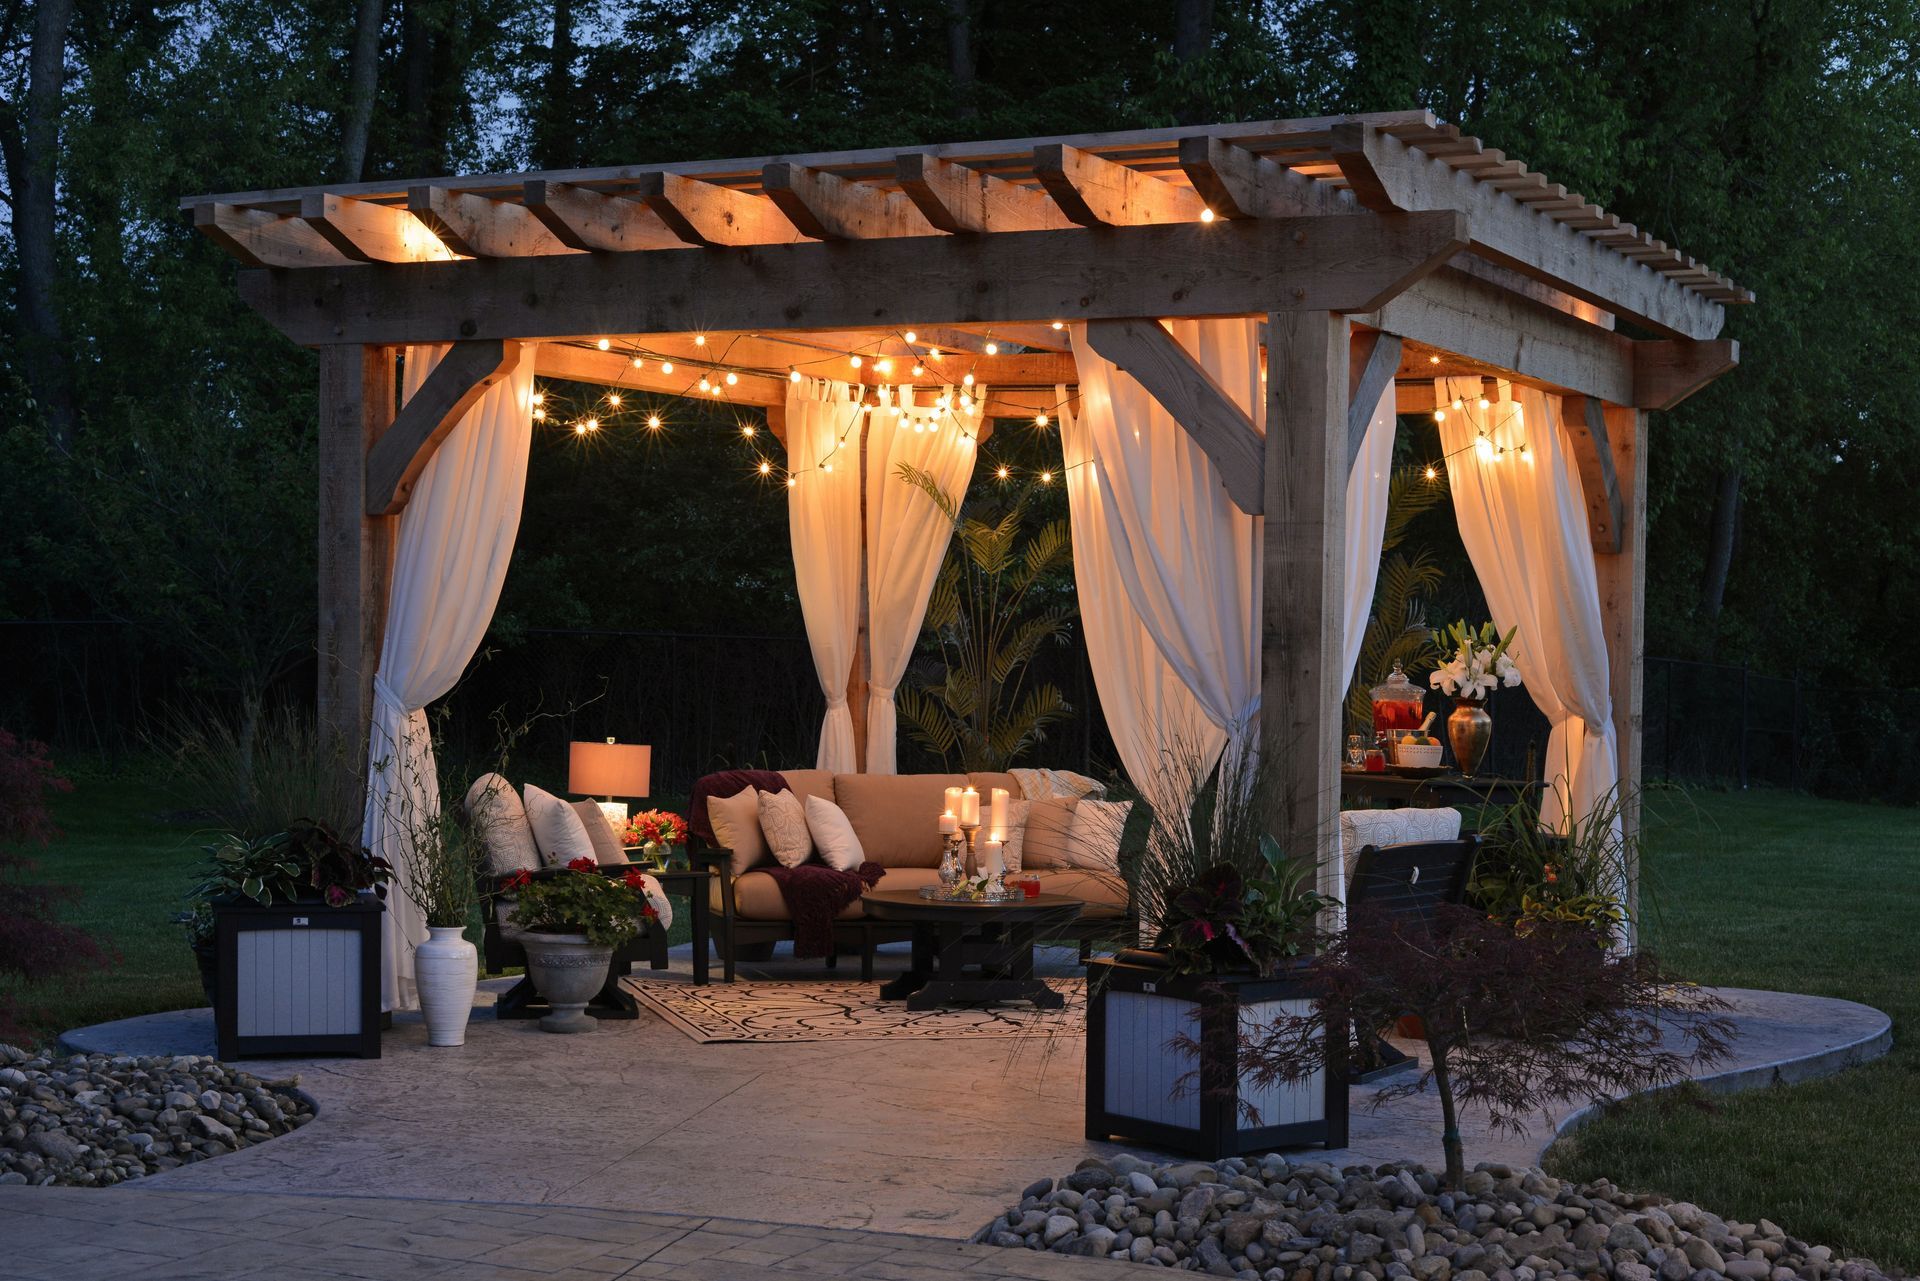 Outdoor pergola with lighting and paver patio